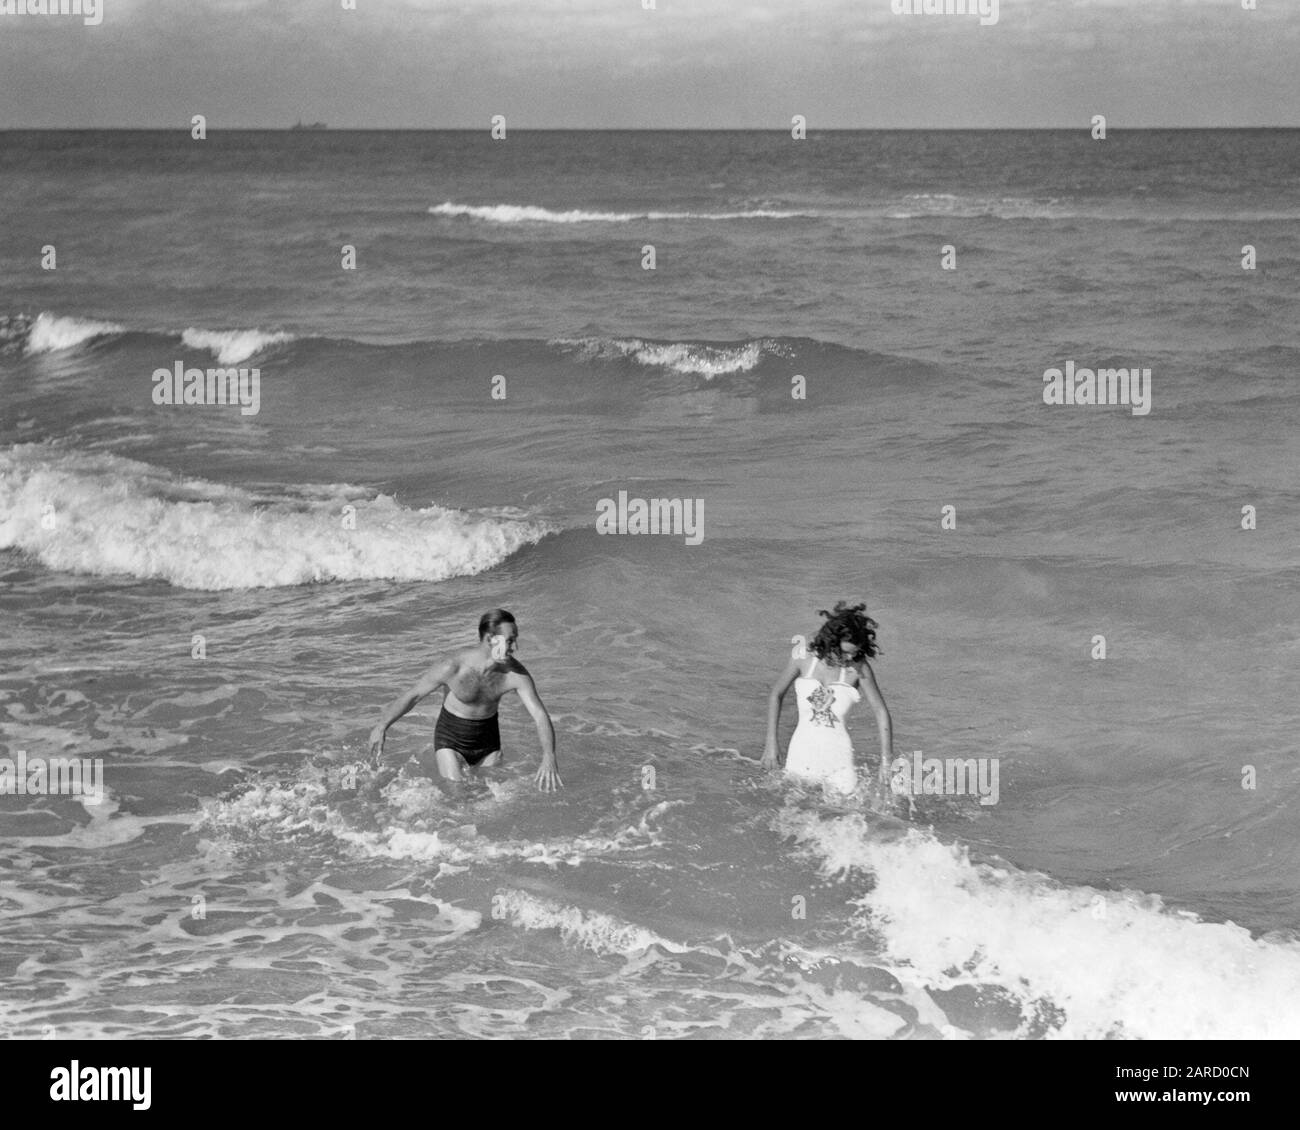 1930s 1940s VACATION COUPLE WEARING BATHING SUITS STANDING WALKING PLAYING IN OCEAN SURF AT BEACH TOGETHER FLORIDA USA - b7138 HAR001 HARS EXERCISING NOSTALGIC ACTIVE PAIR ROMANCE OLD TIME NOSTALGIA OLD FASHION 1 FITNESS SILLY TROPICAL HEALTHY BALANCE COMIC VACATION ATHLETE PLEASED JOY LIFESTYLE OCEAN FEMALES MARRIED SPOUSE HUSBANDS HEALTHINESS ATHLETICS UNITED STATES COPY SPACE FRIENDSHIP FULL-LENGTH LADIES PERSONS UNITED STATES OF AMERICA MALES ATHLETIC SURF B&W PARTNER NORTH AMERICA FREEDOM NORTH AMERICAN TIME OFF ACTIVITY HUMOROUS HAPPINESS PHYSICAL CHEERFUL HIGH ANGLE LEISURE STRENGTH Stock Photo